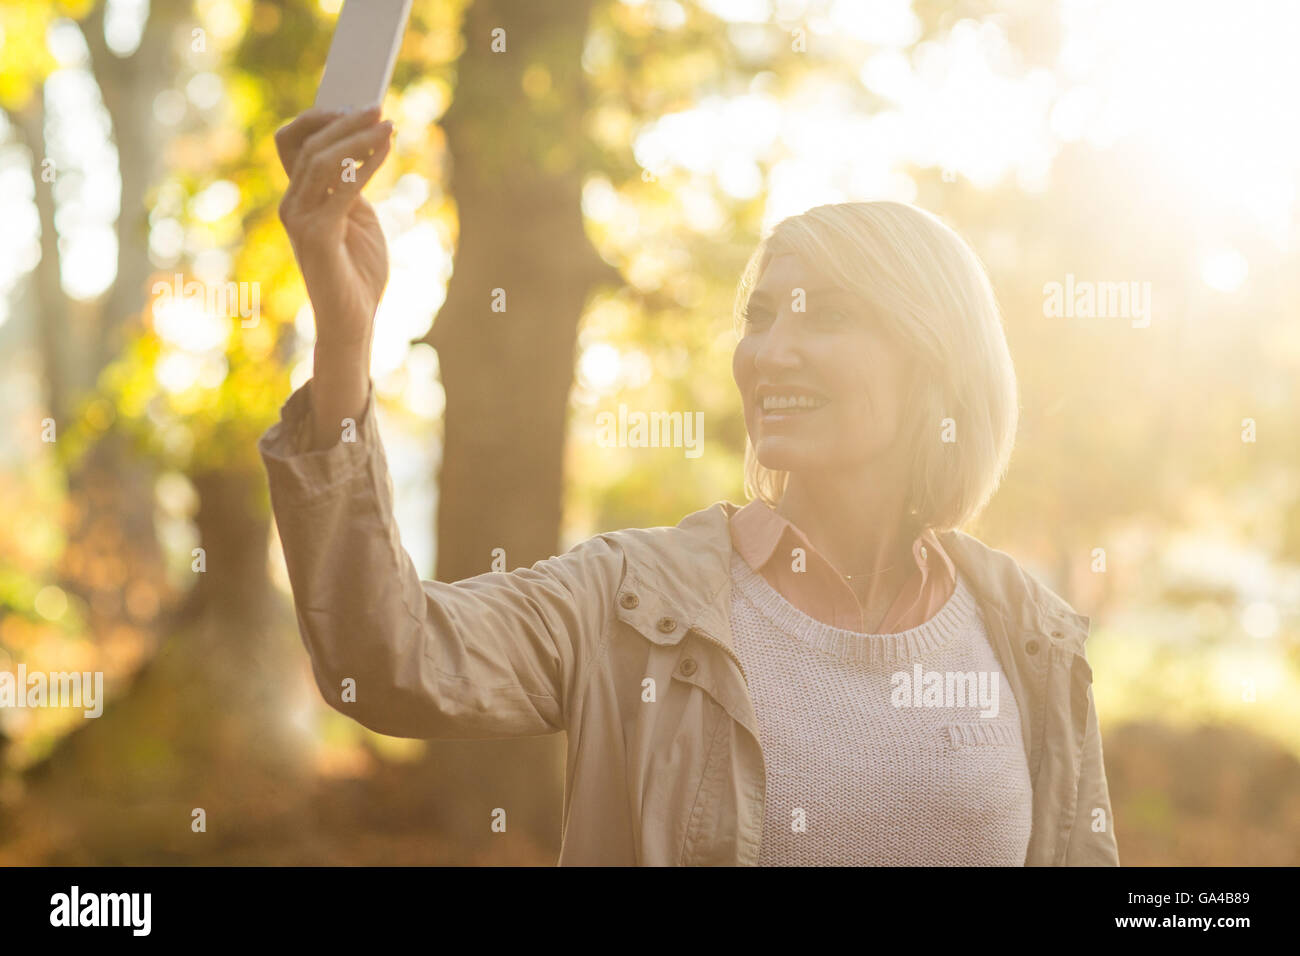 Mature woman smiling while using cellphone Stock Photo